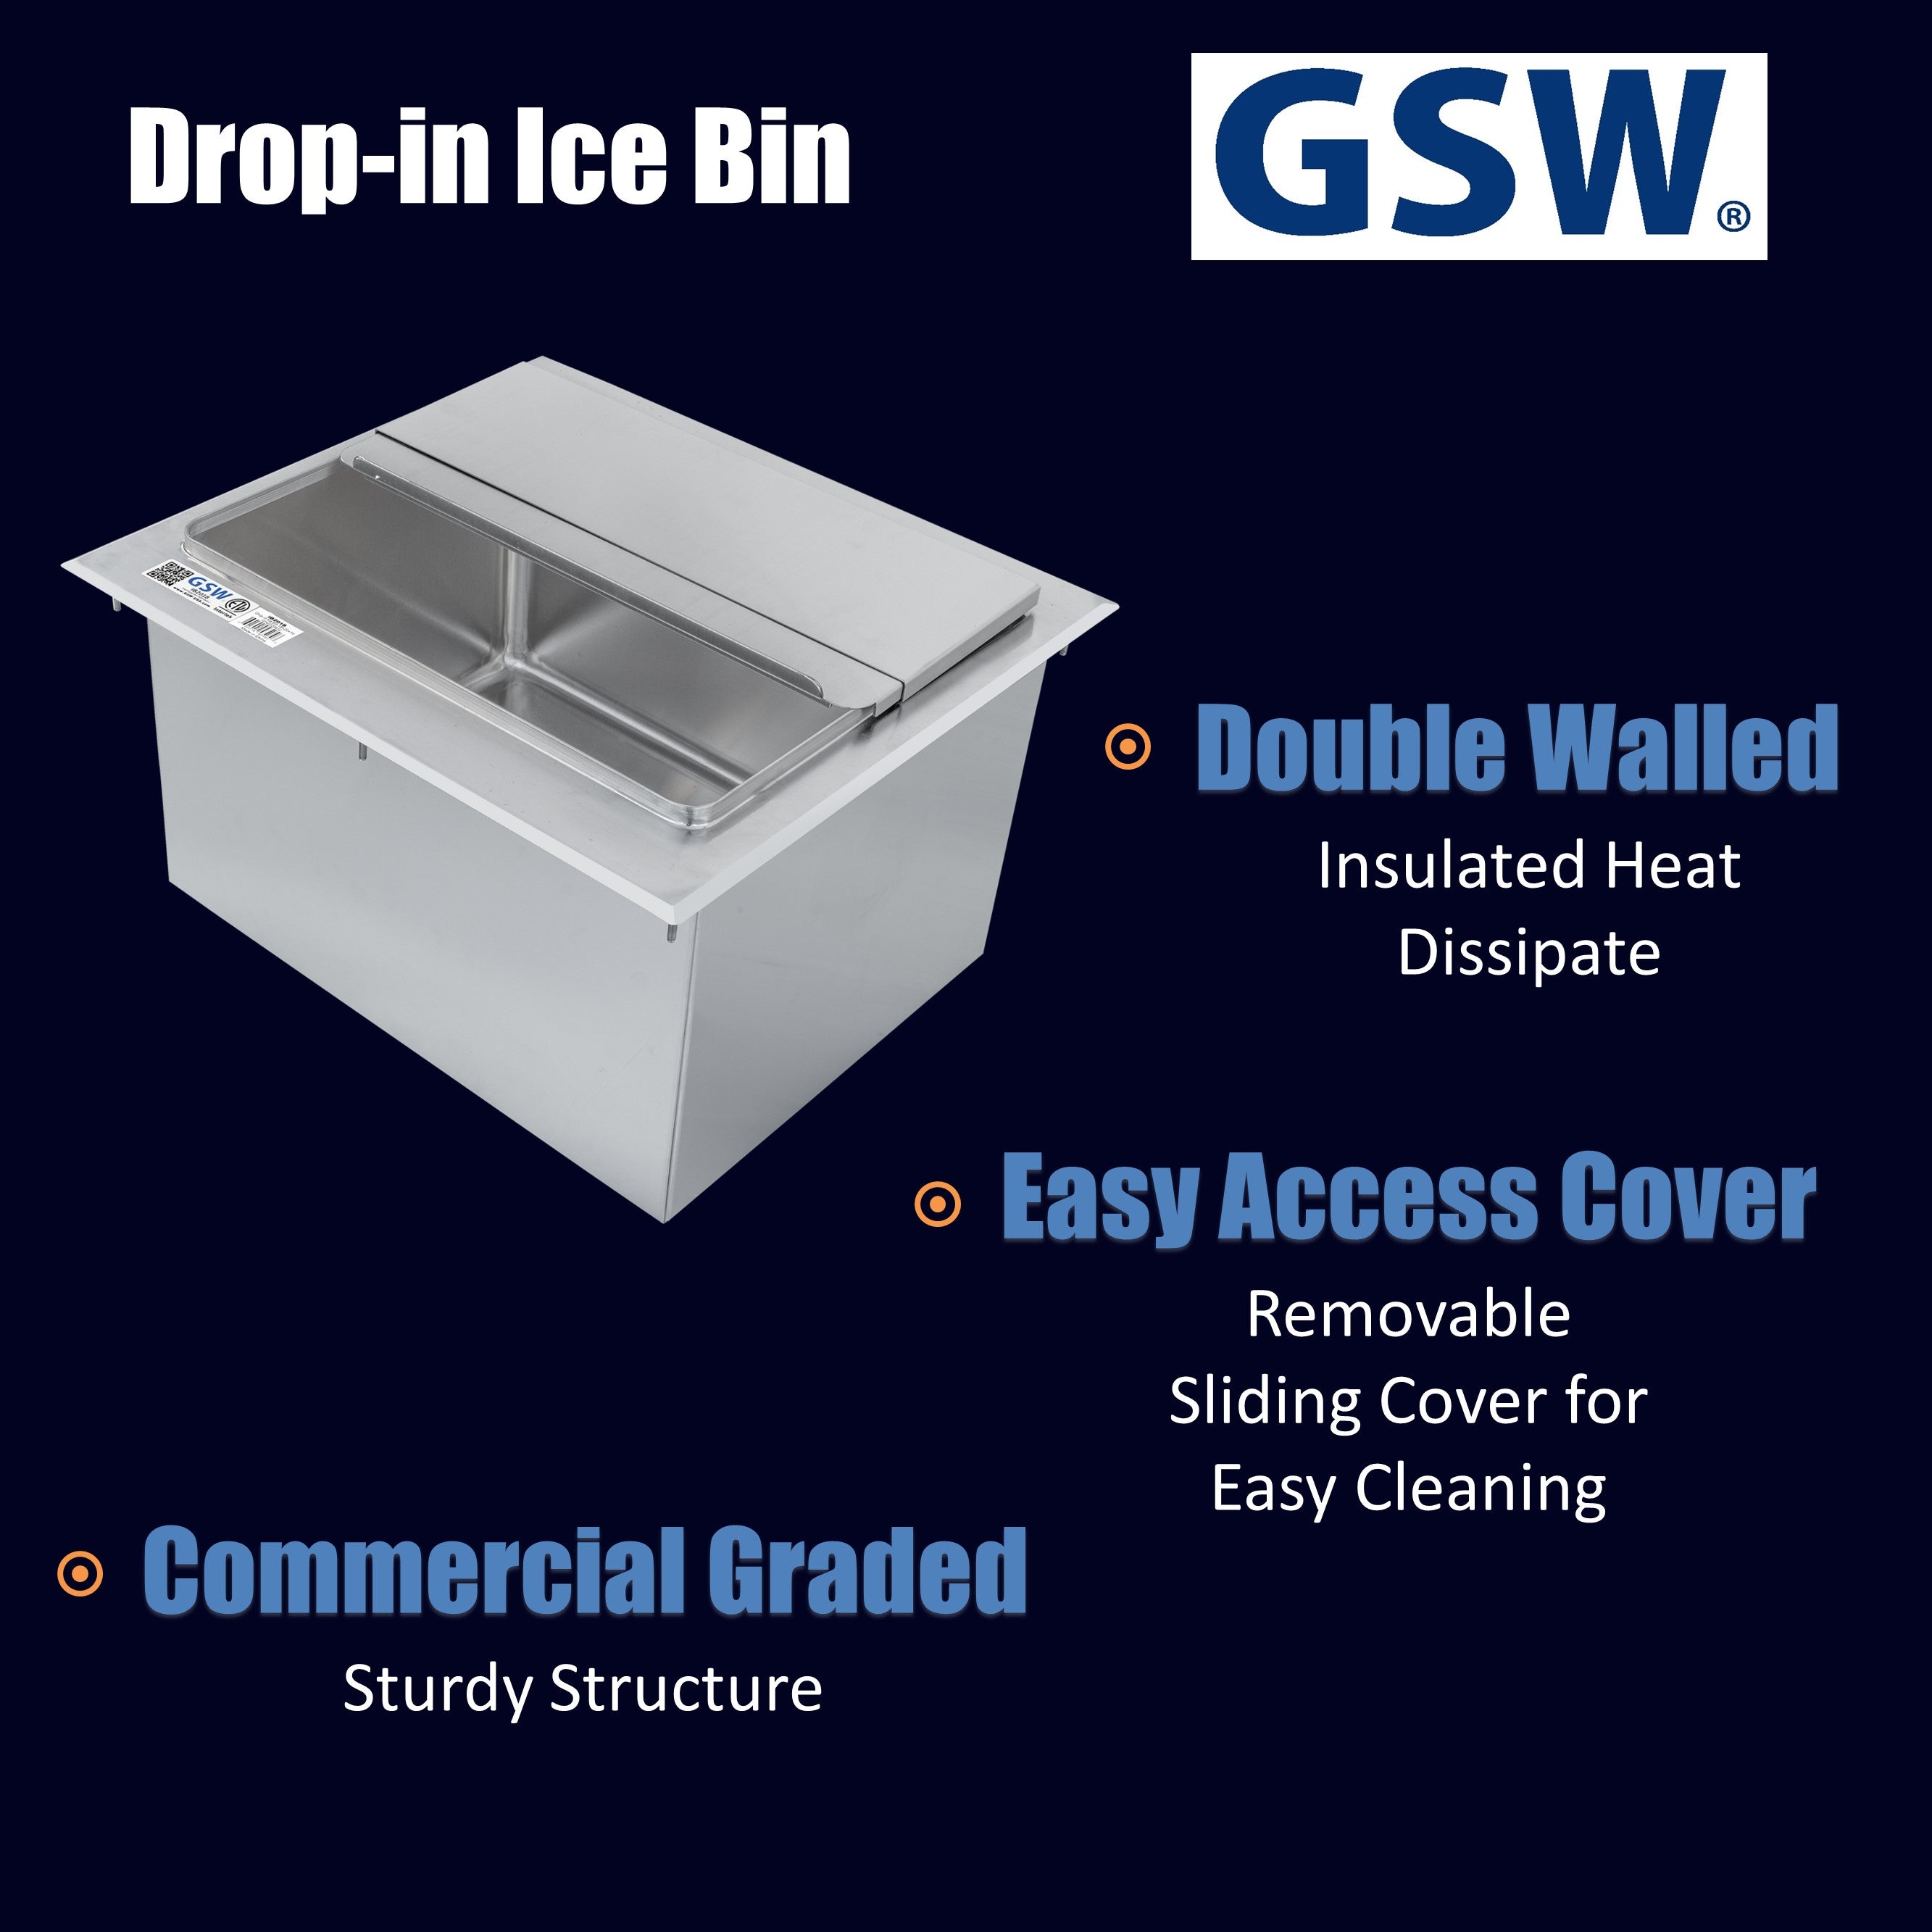 GSW IB2018 Stainless Steel Drop-In Ice Bin 18”D x 20”W x 14”H with Removable Sliding Cover, 9” x 14” Double Walled Ice Bin with 1” NPT Drain, for Storing Ice Cold Wine Beer